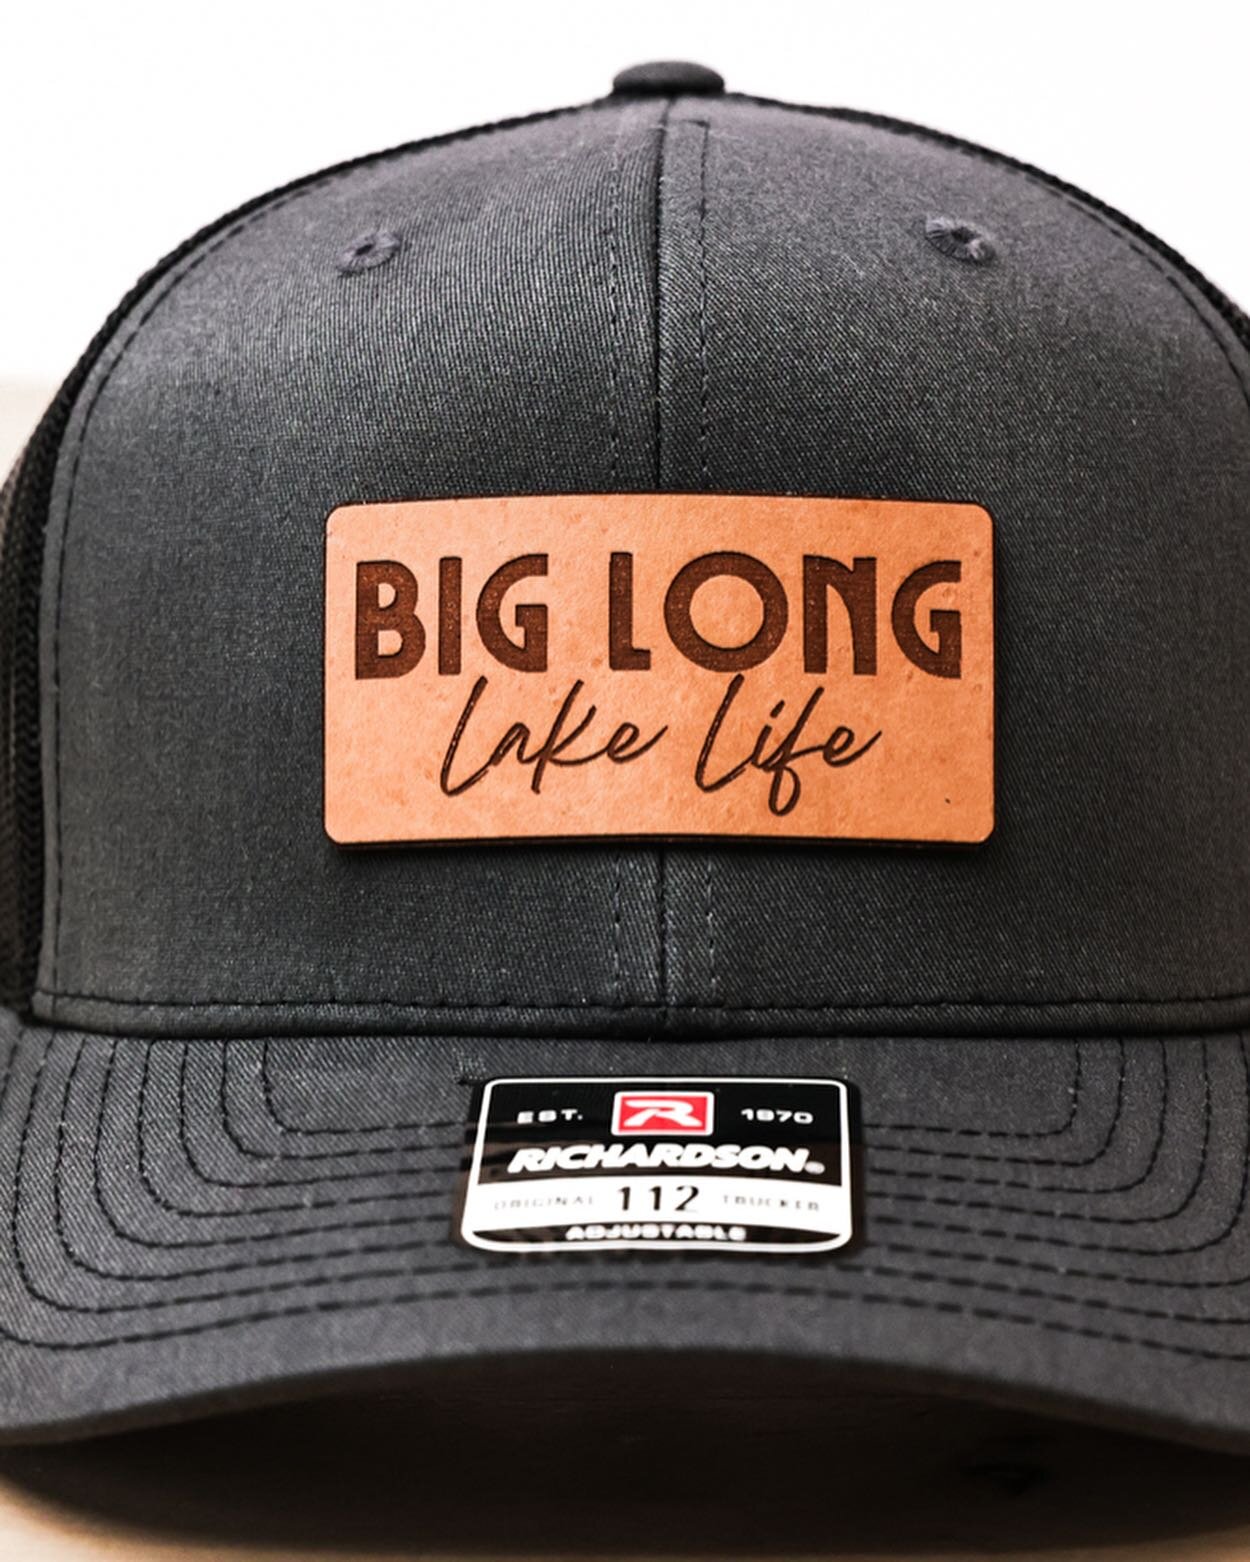 It&rsquo;s slowly getting closer to hitting the lakes&hellip;who ready and what&rsquo;s your favorite lake to go to???

#lakelife #lakelifestyle #lakelifeisthebestlife #lakehat #summeriscoming #lakeseason #boatlife #lifeisbetteratthelake